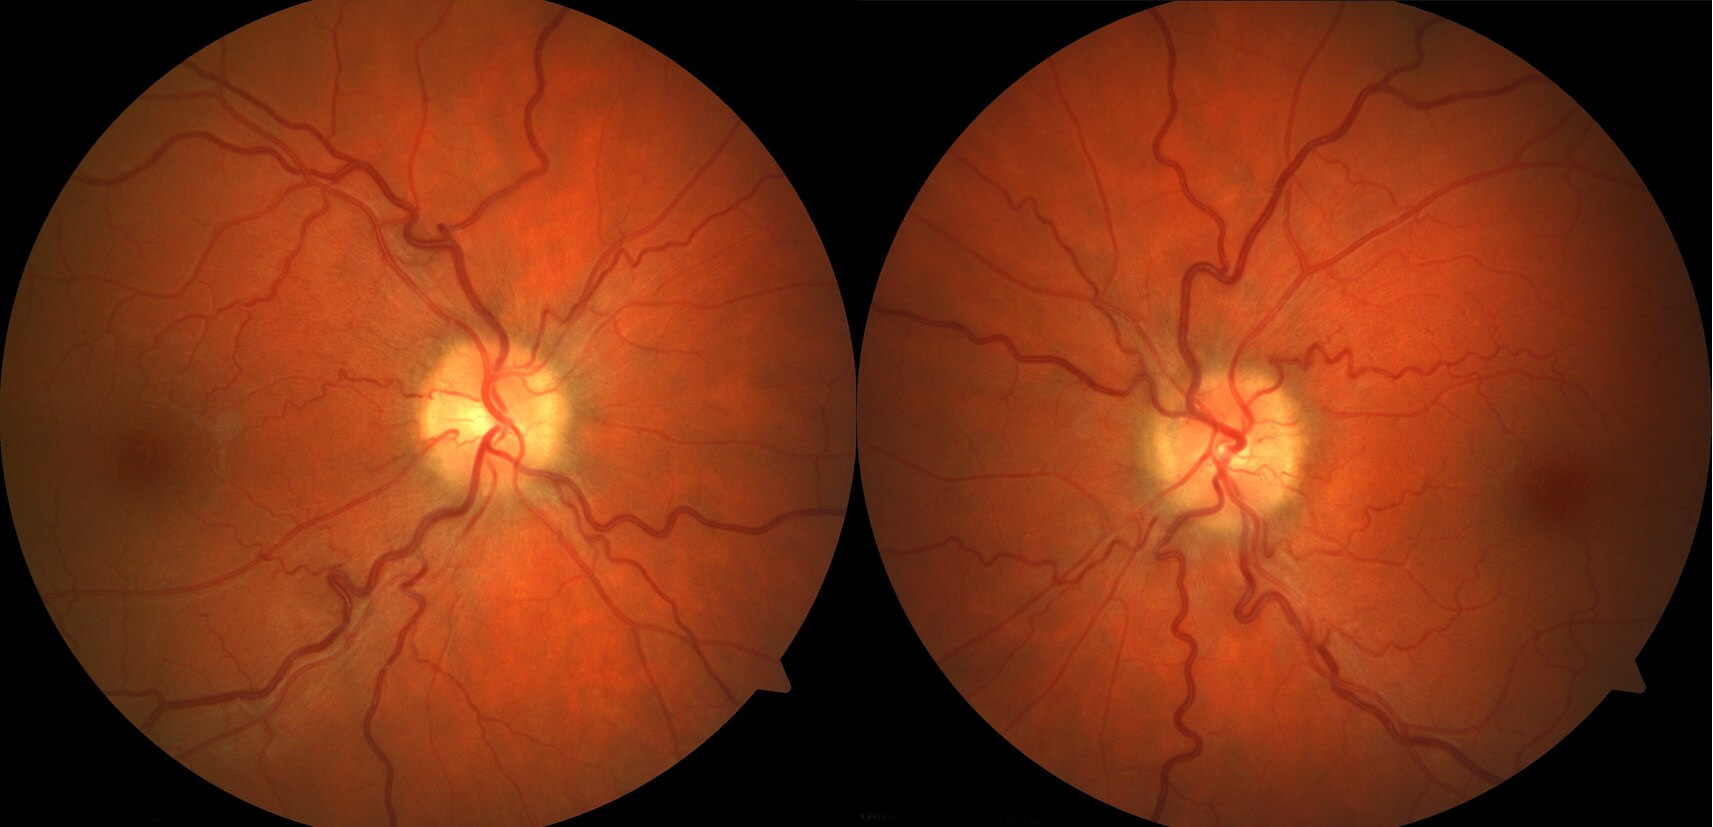 Resolution of the optic disc swelling, 3 months after commencement of acetazolamide (Diamox).